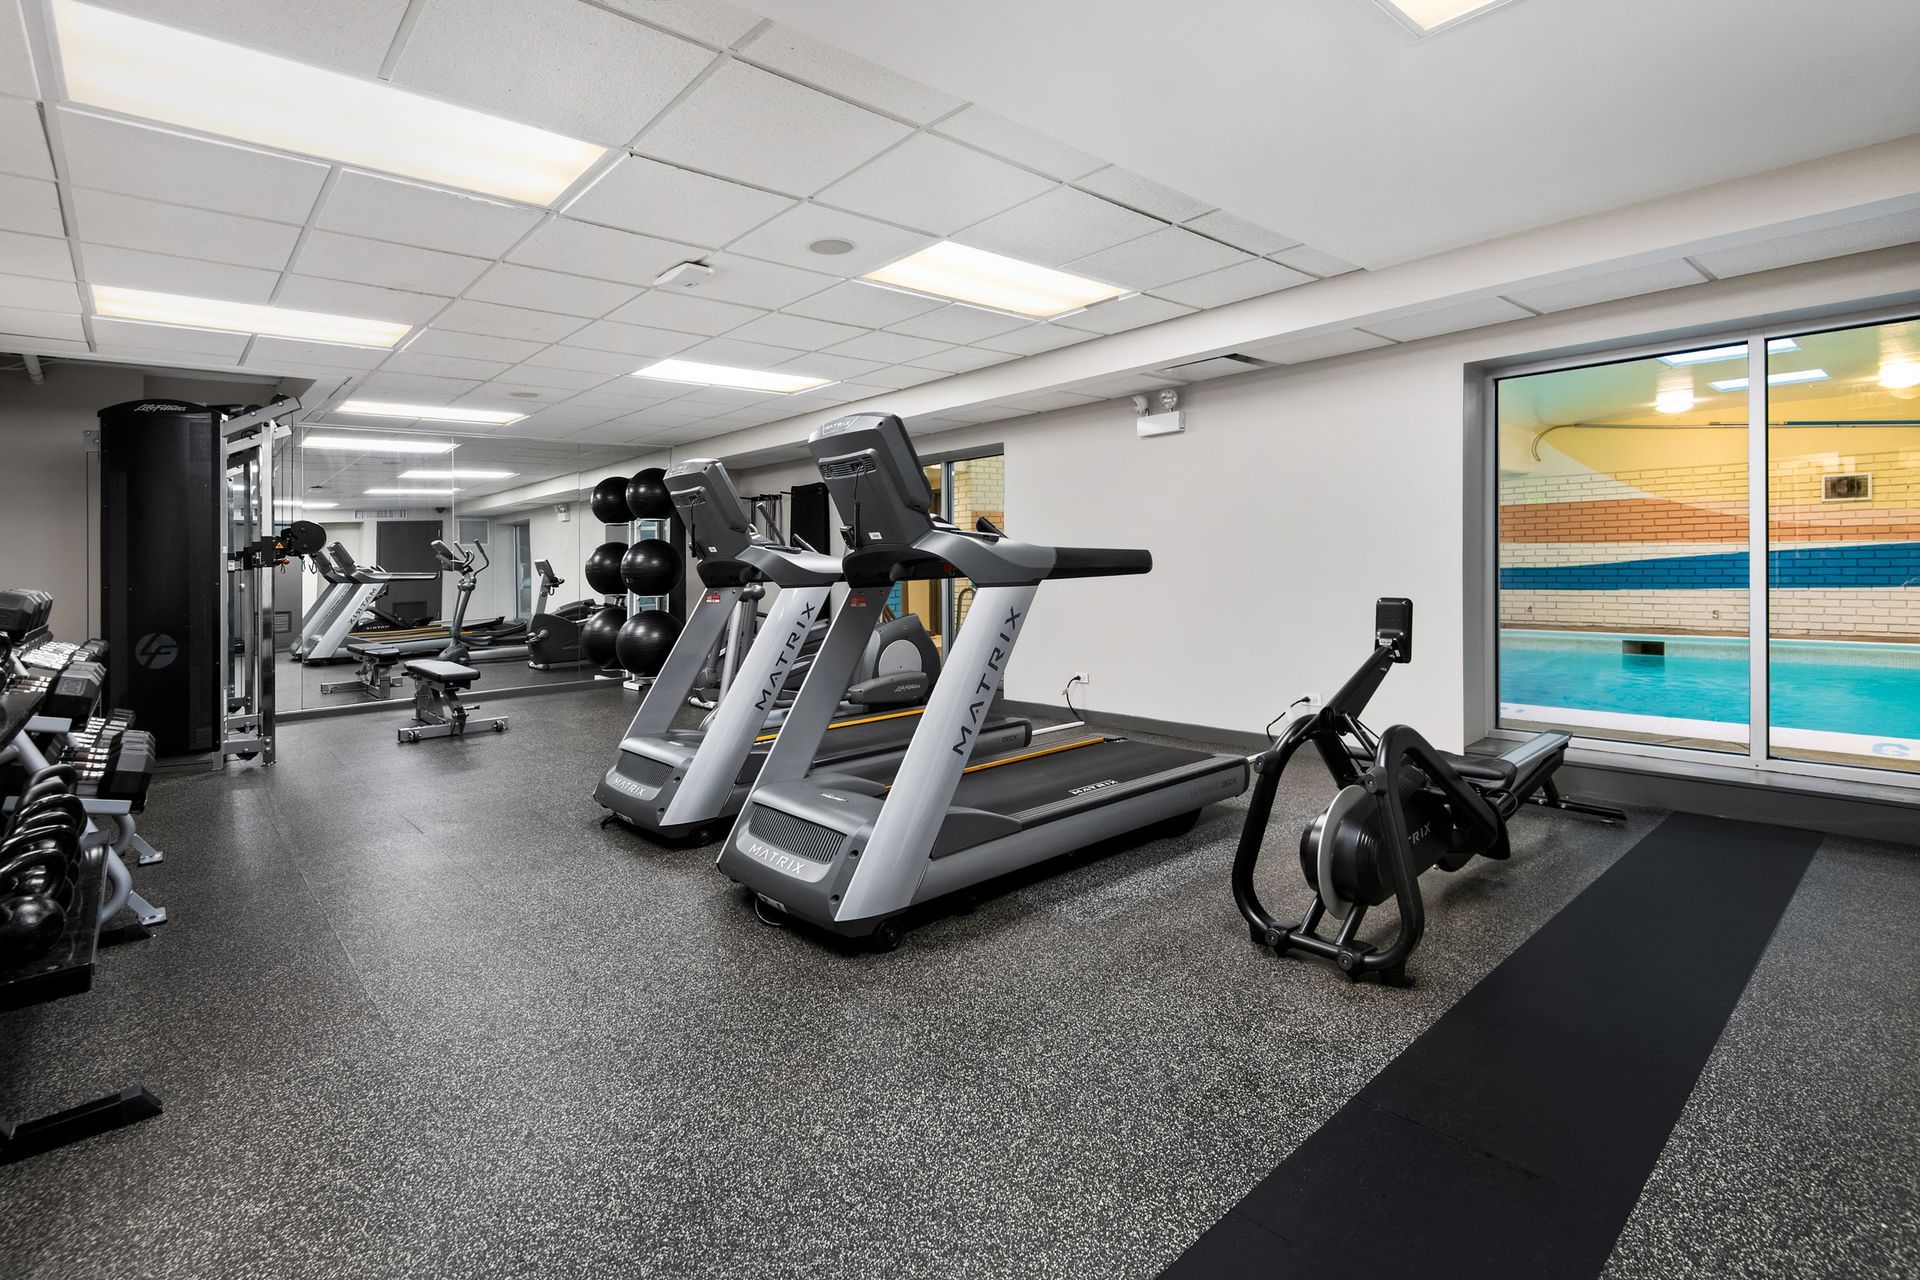 A gym with treadmills, a row of dumbbells, and next to a swimming pool.